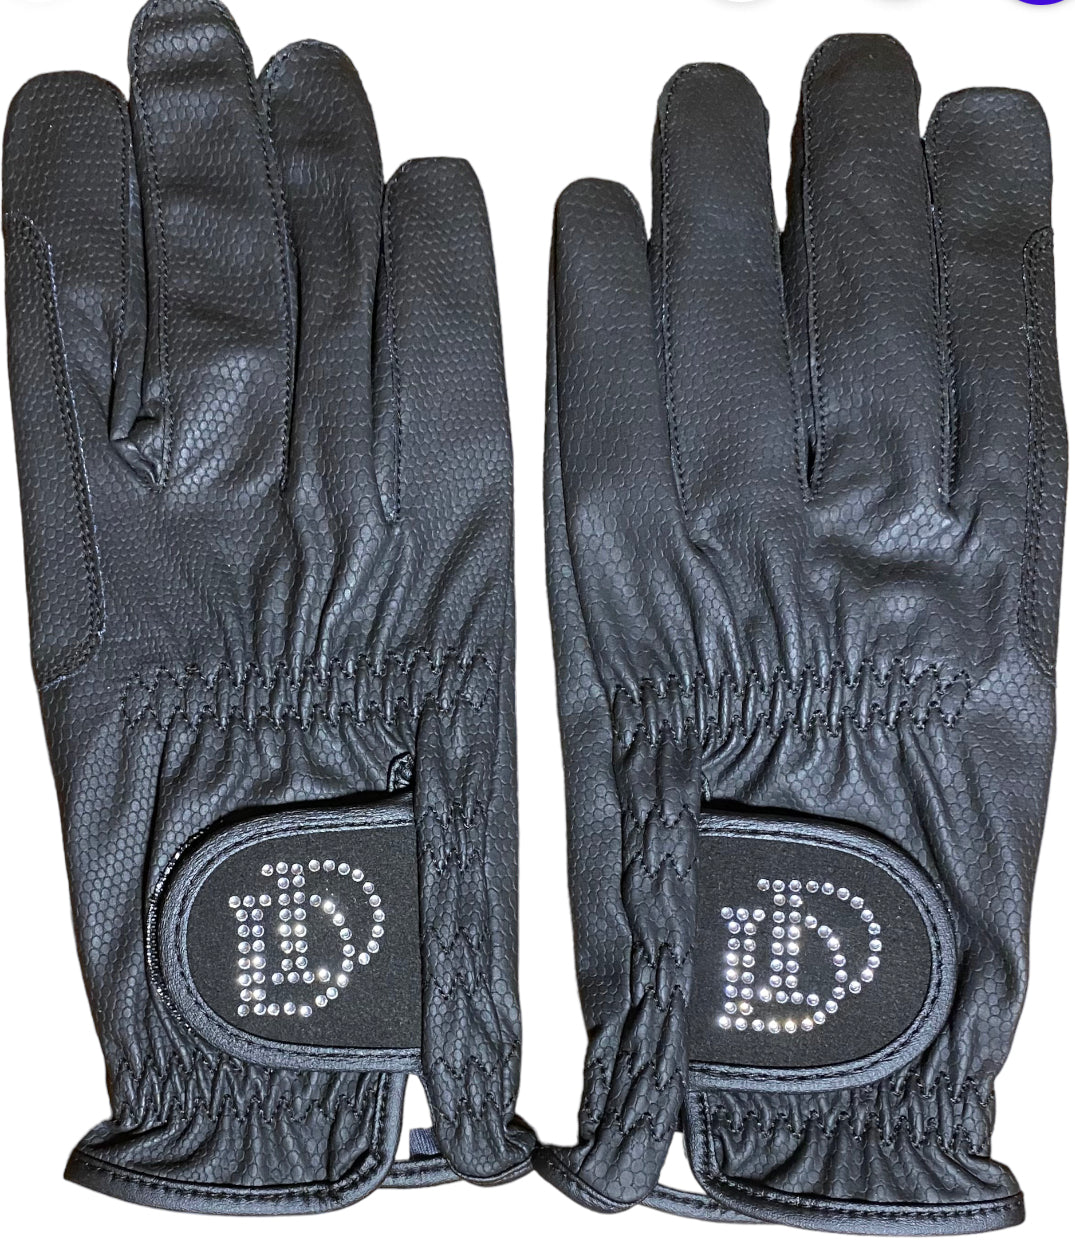 Black Riding Gloves with Added Crystal detail